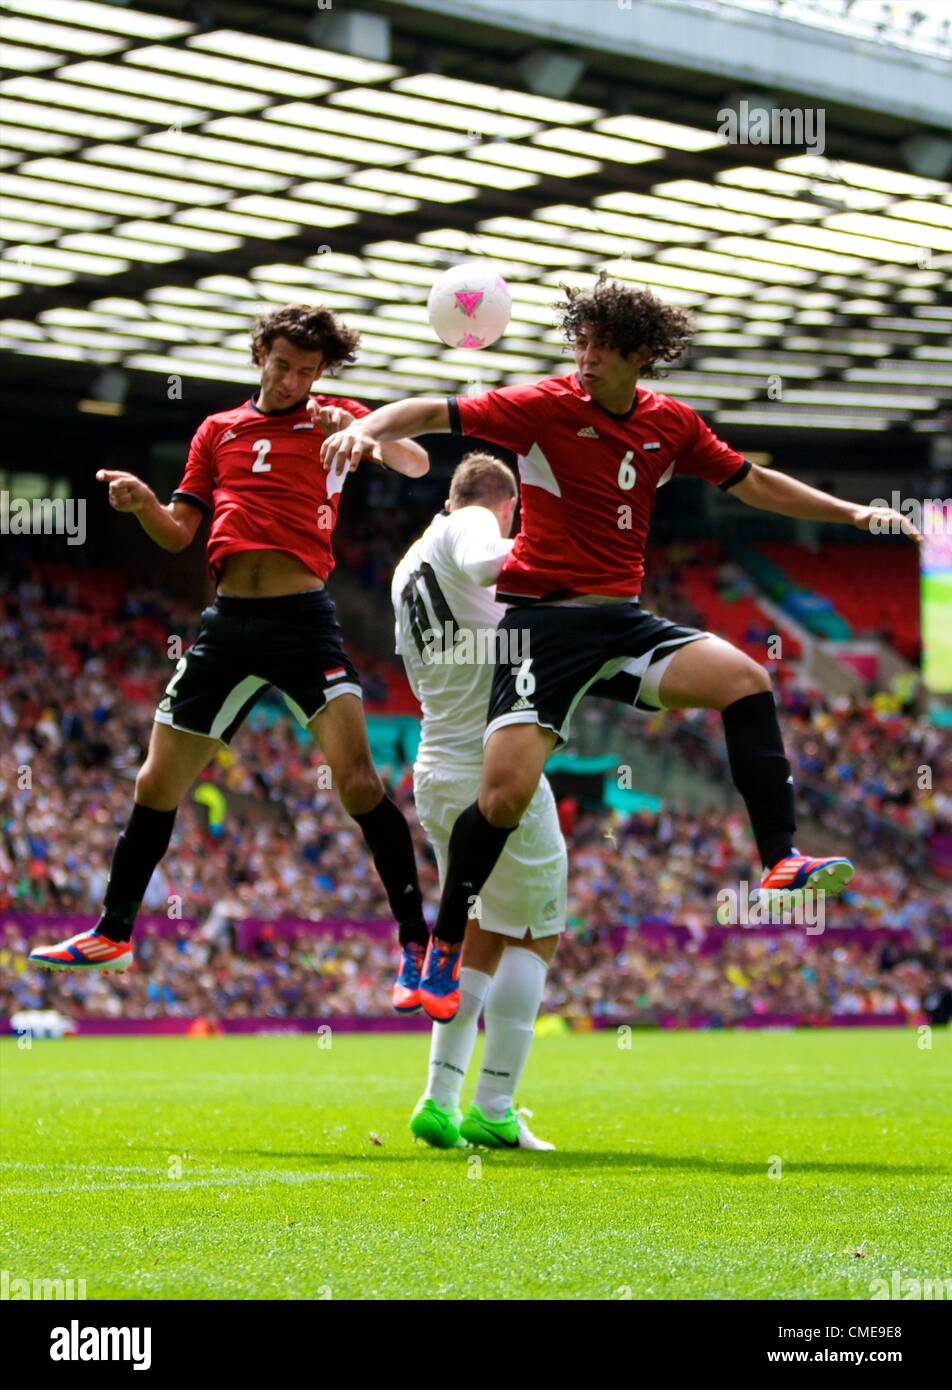 29.07.2012 Manchester, England. Egypt defender Mahmoud Alaa El-Din, Egypt defender Ahmed Hegazy beat New Zealand forward Chris Wood to the high ball during the first round group C mens match between Egypt and New Zealand. Stock Photo